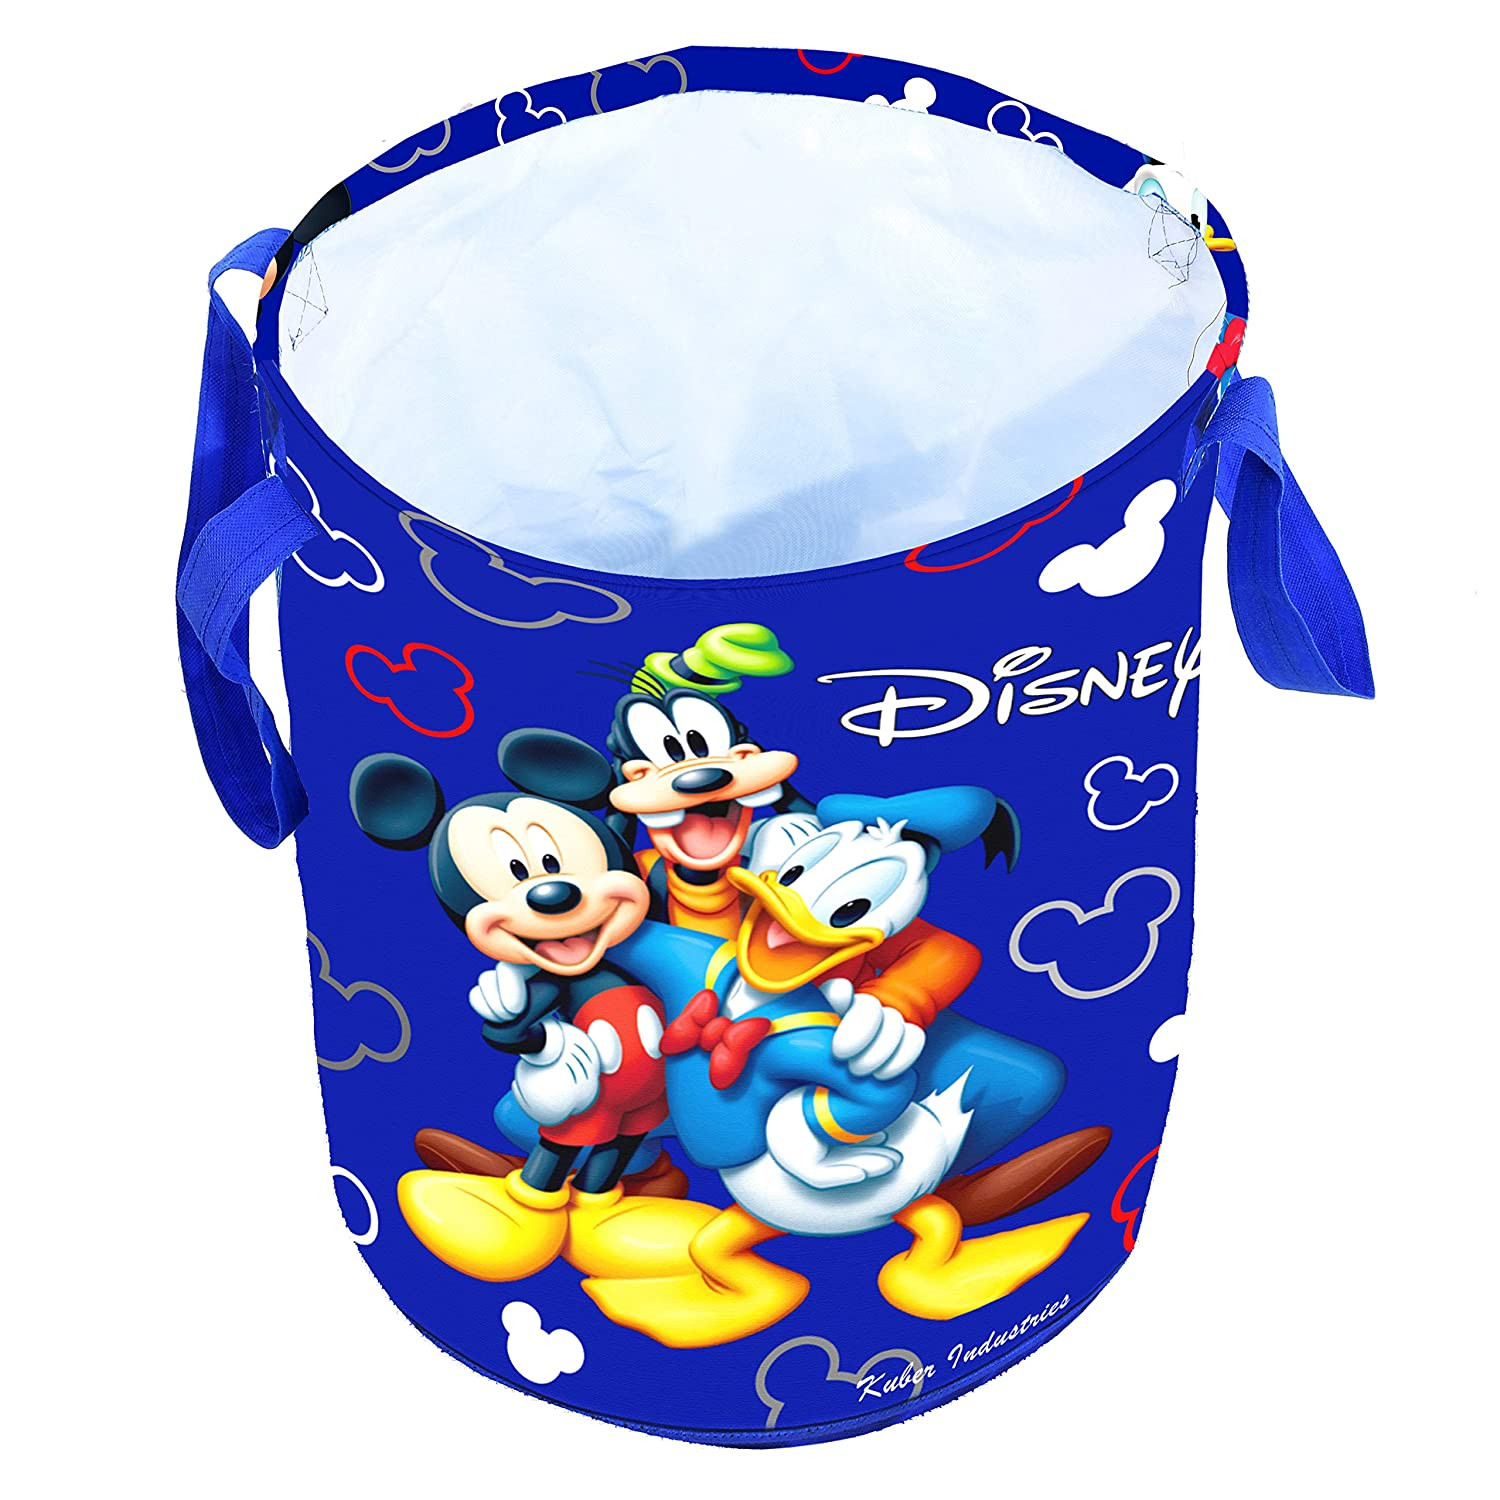 Kuber Industries Disney Team Mickey Print Non Woven Fabric Foldable Large Size Storage Cube Toy And Laundry Bag, Laundry Basket Organizer 45 L (Set Of 2,Royal Blue)